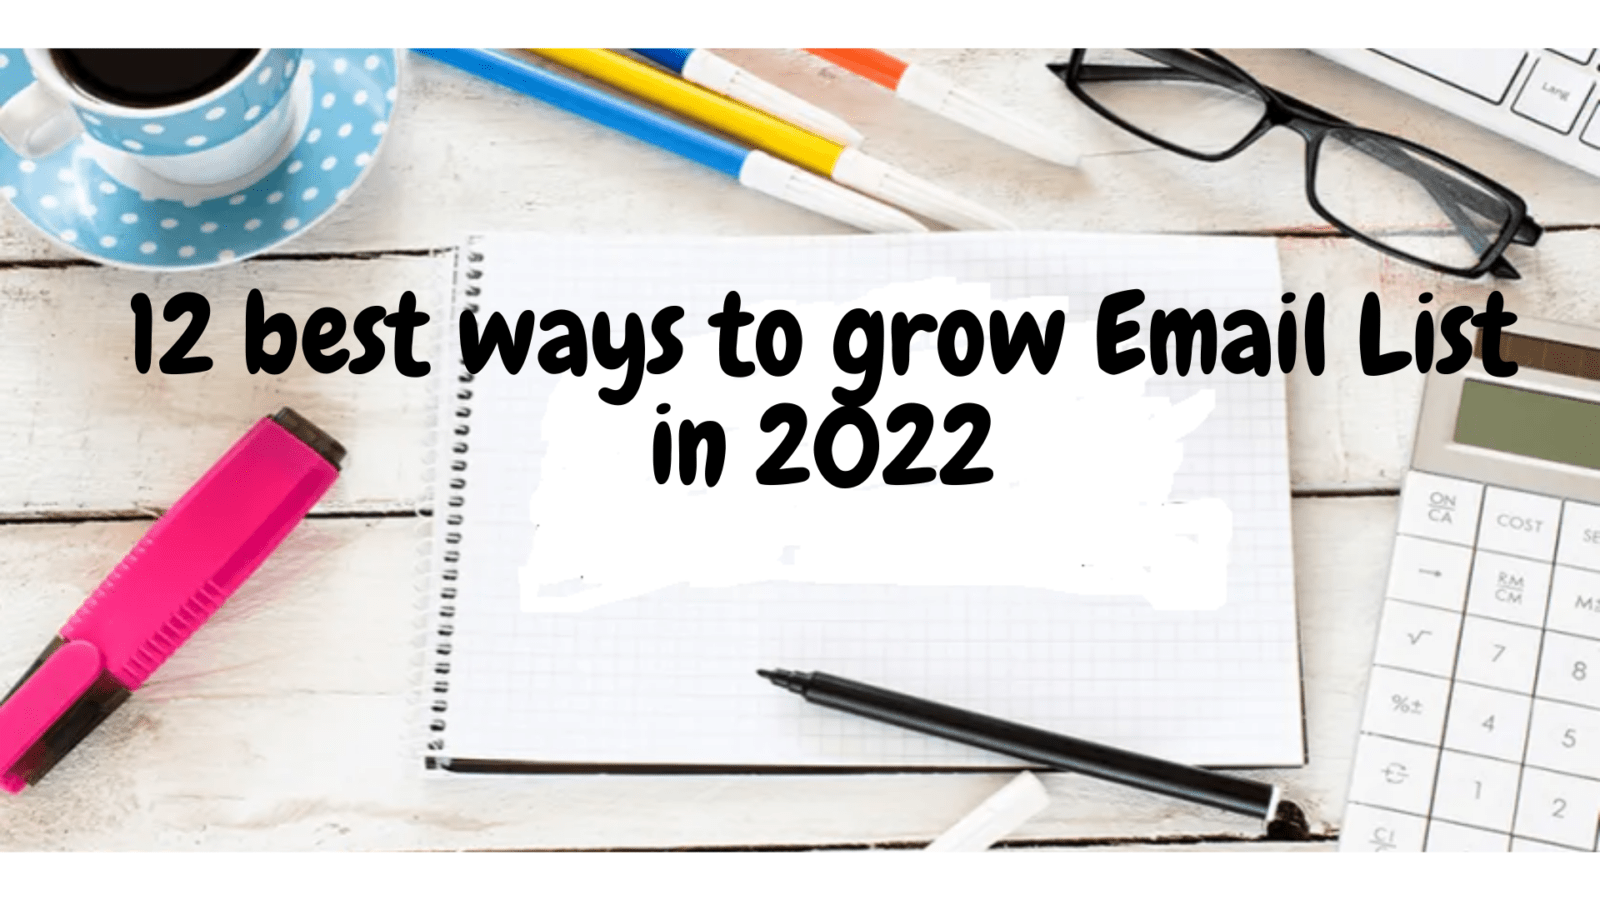 12 best ways to grow Email List in 2022